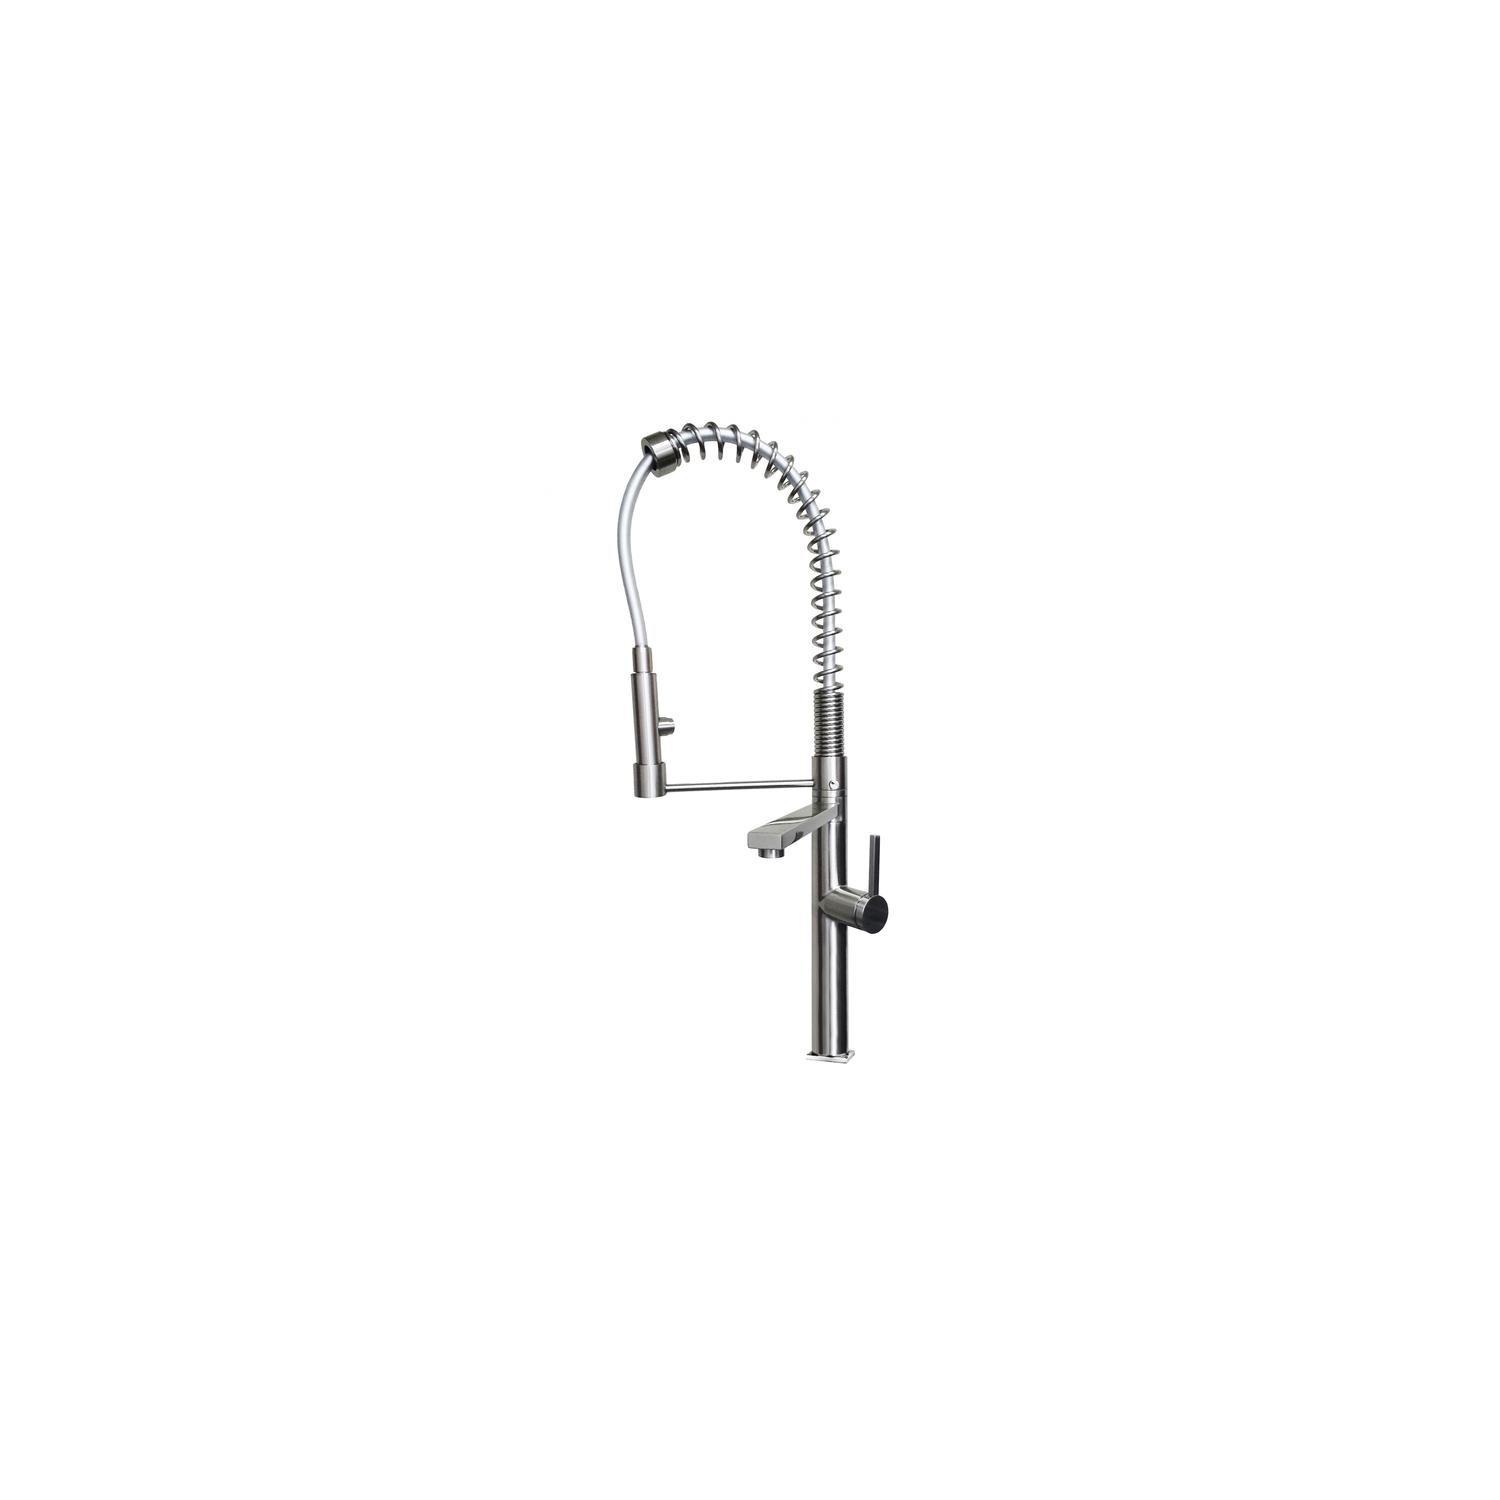 Ancona Acero Pull-Down Single Handle Kitchen Faucet in Brushed Nickel